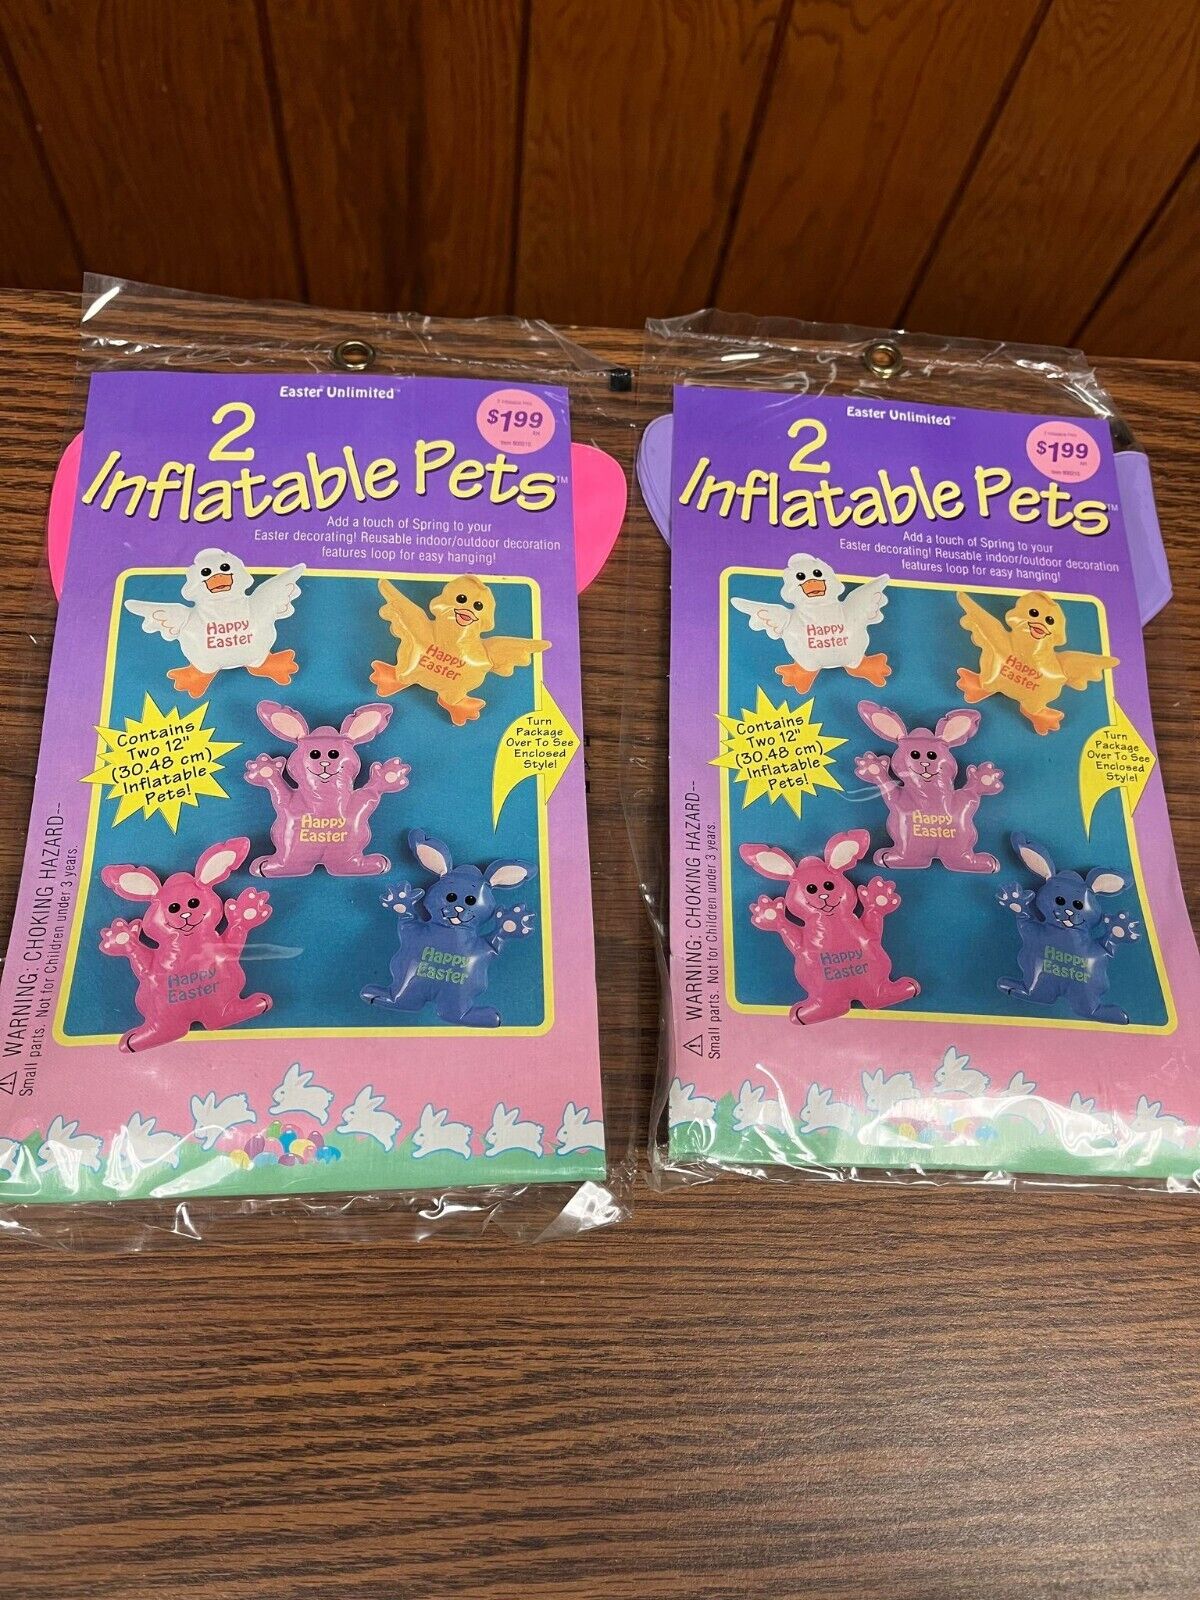 VINTAGE EASTER UNLIMITED 2 PACKS OF 2 INFLATABLE 12'' PETS RABBIT BUNNY